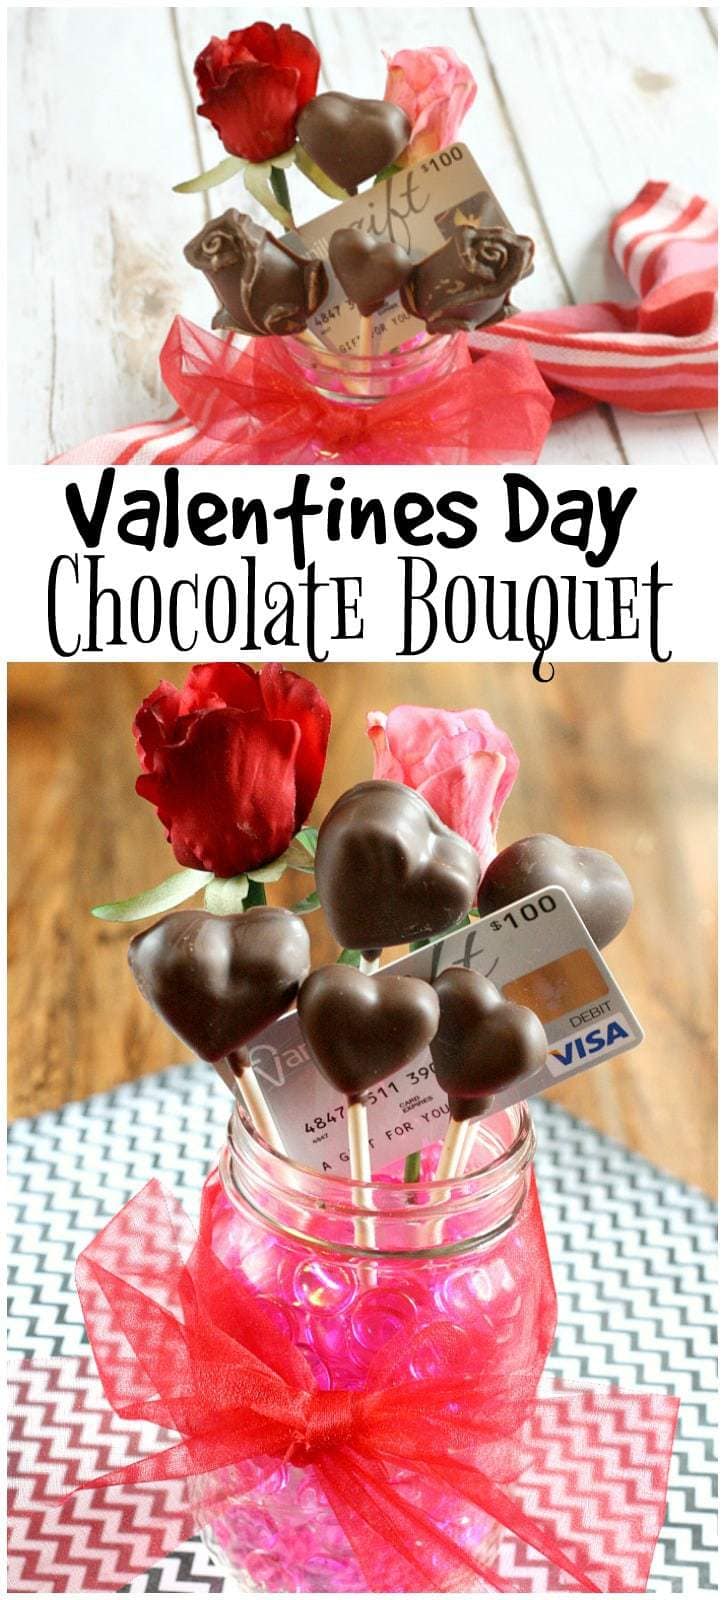 This Valentines Day Chocolate Bouquet is the perfect combination of chocolate, flowers and a gift card that your sweetheart is guaranteed to adore!